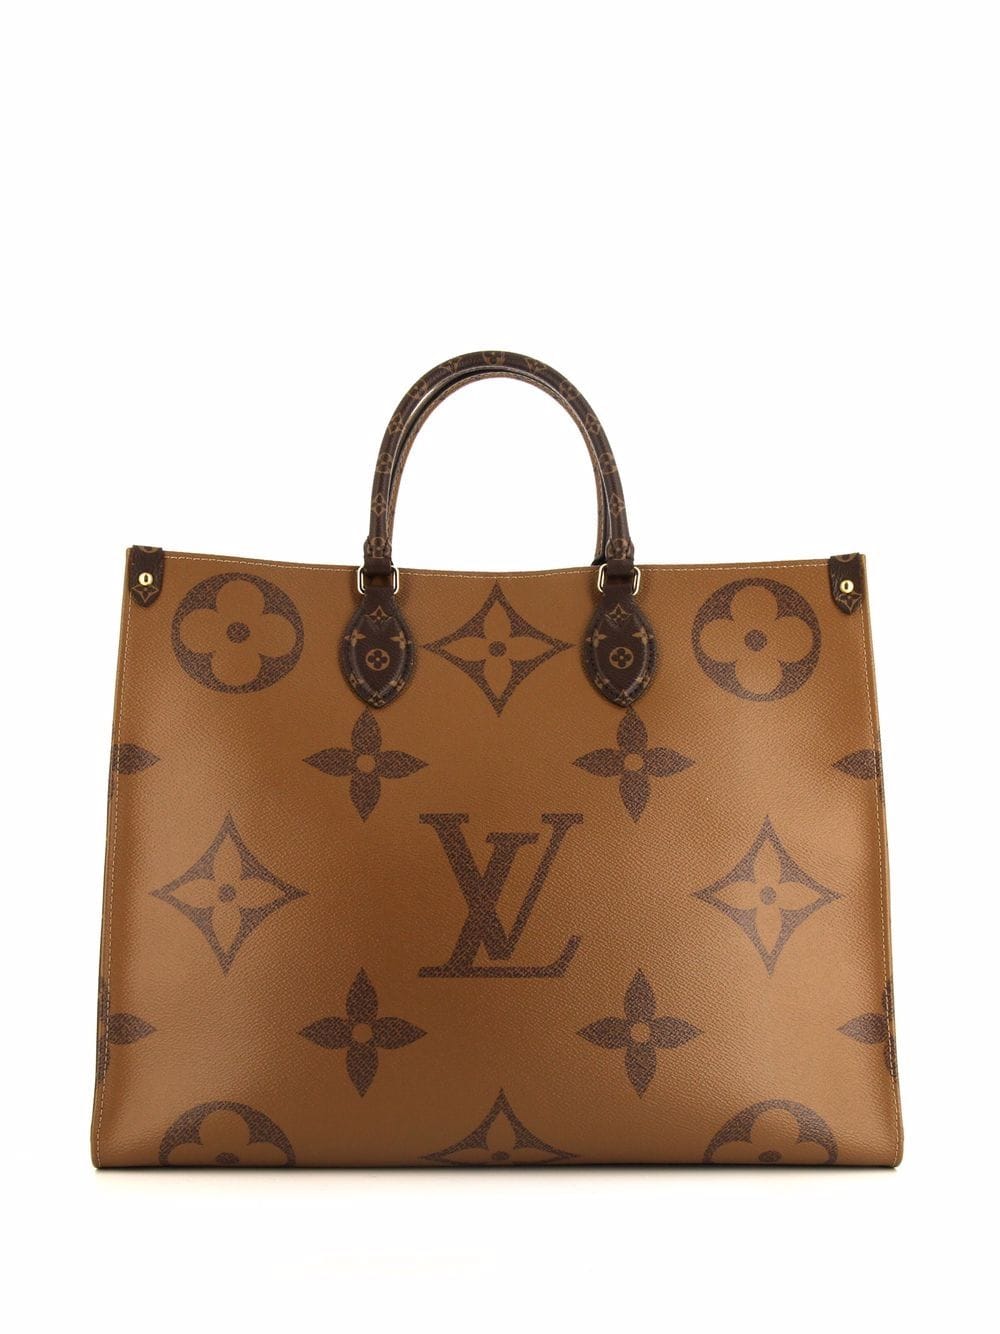 Louis Vuitton 2019 pre-owned On The Go GM Tote Bag - Farfetch